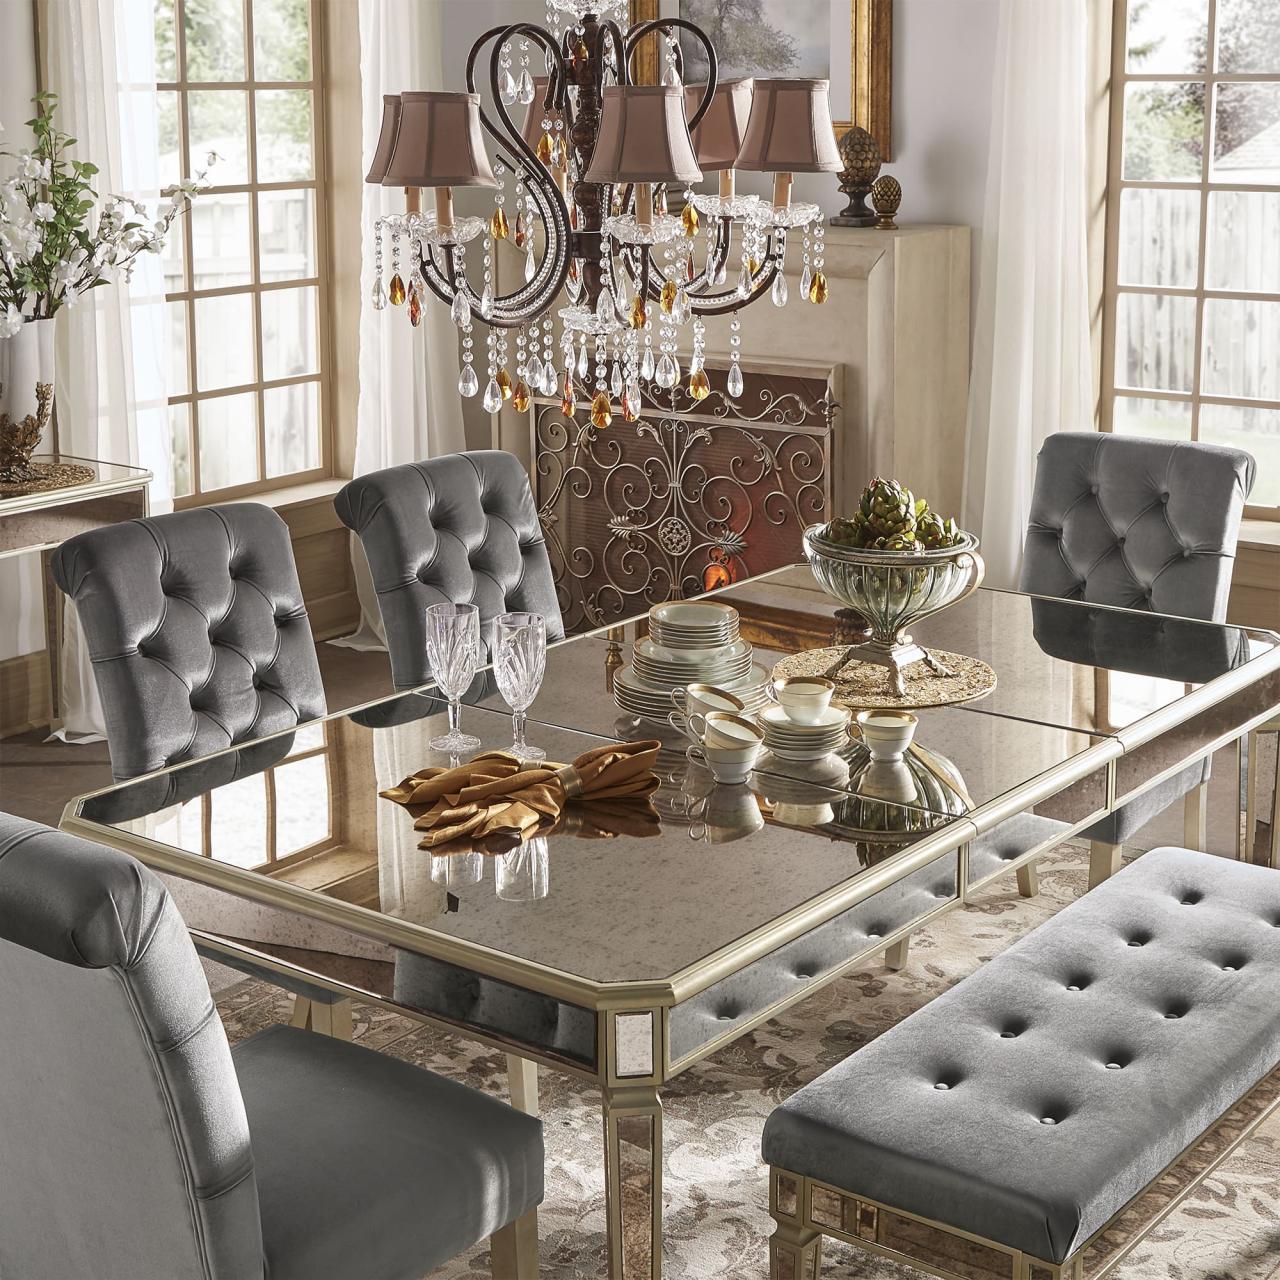 Overstock dining room sets